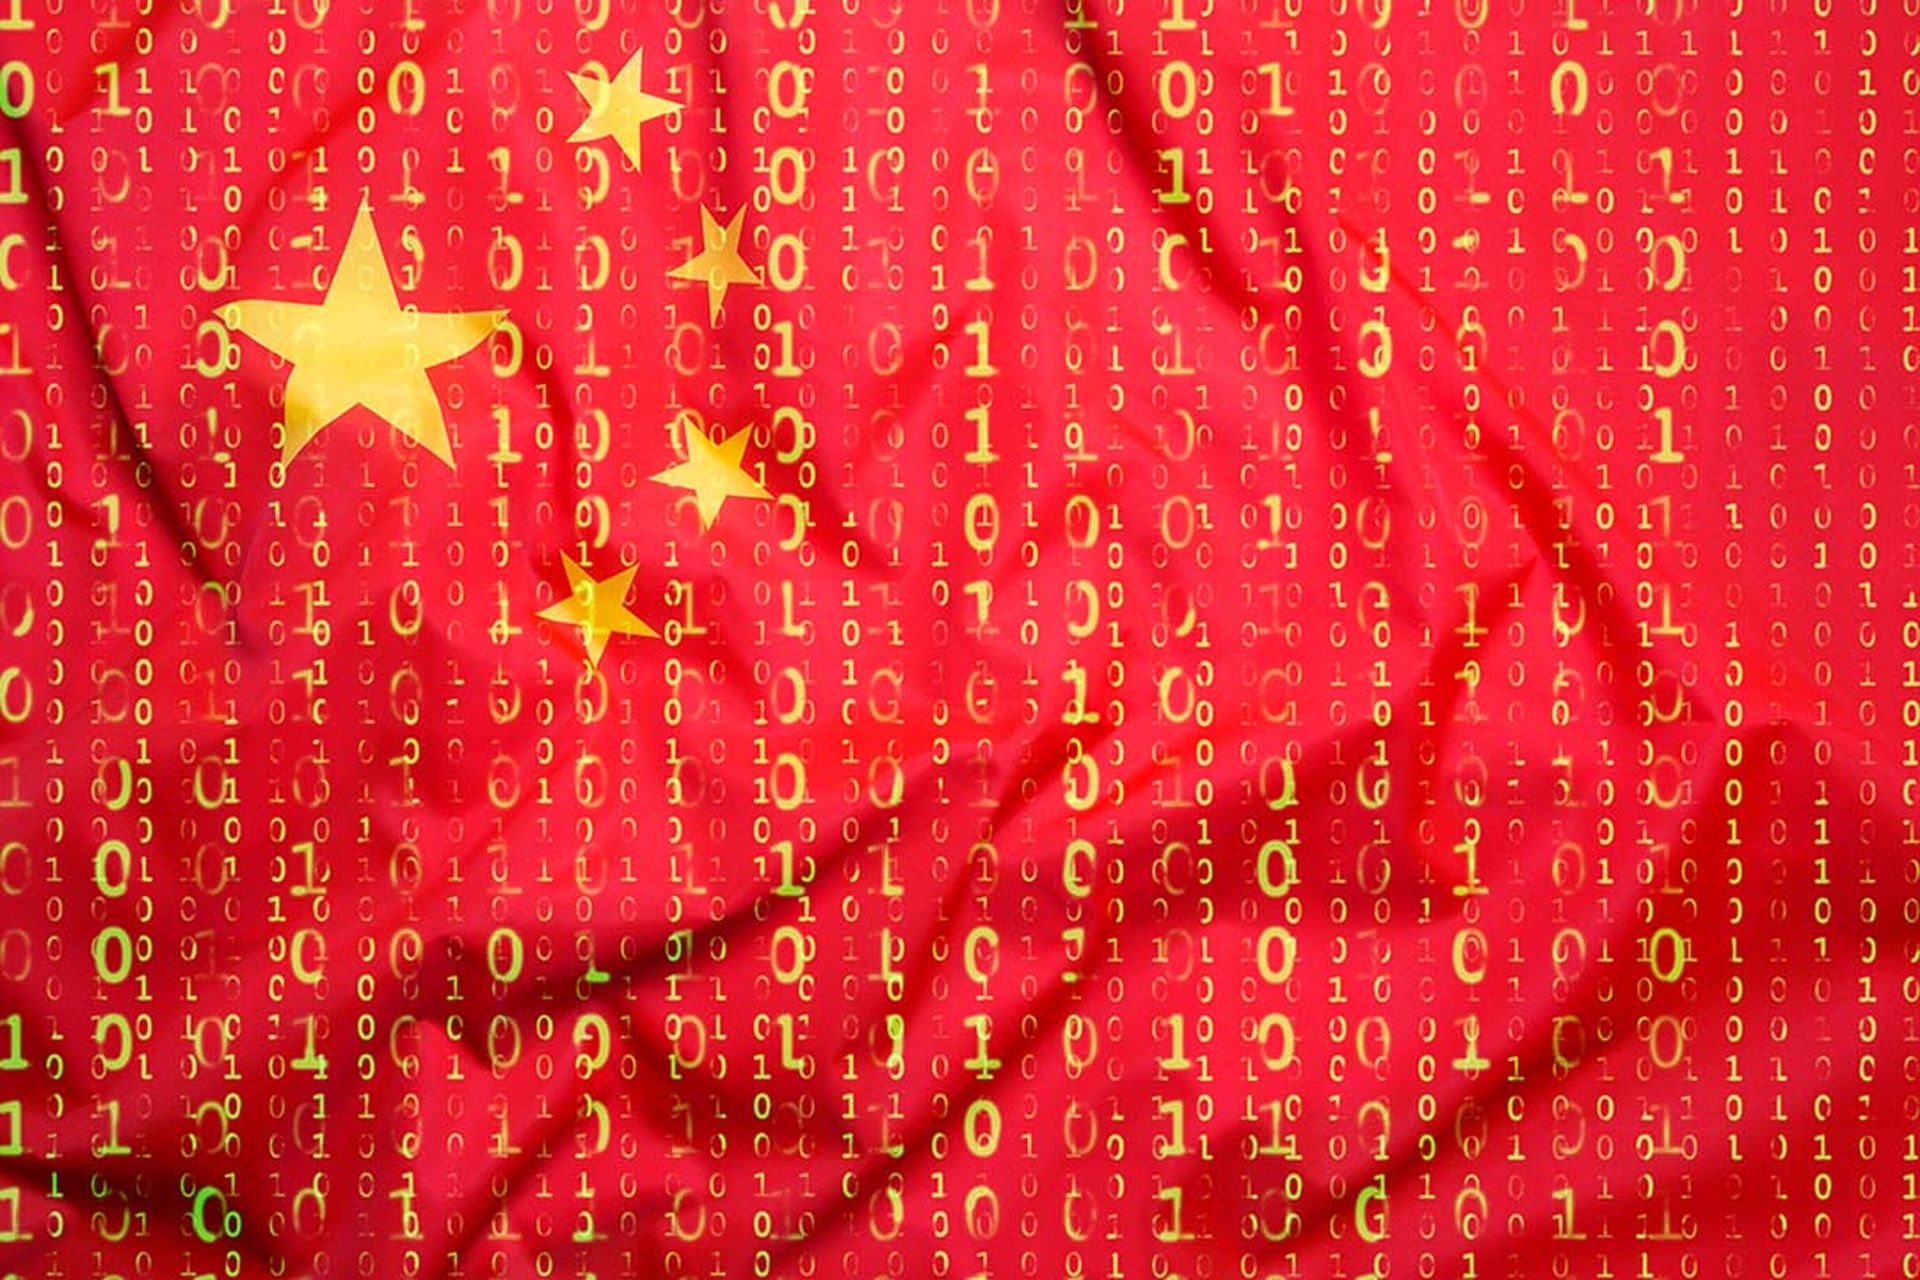 DOJ accuses China of running disinformation campaign in US